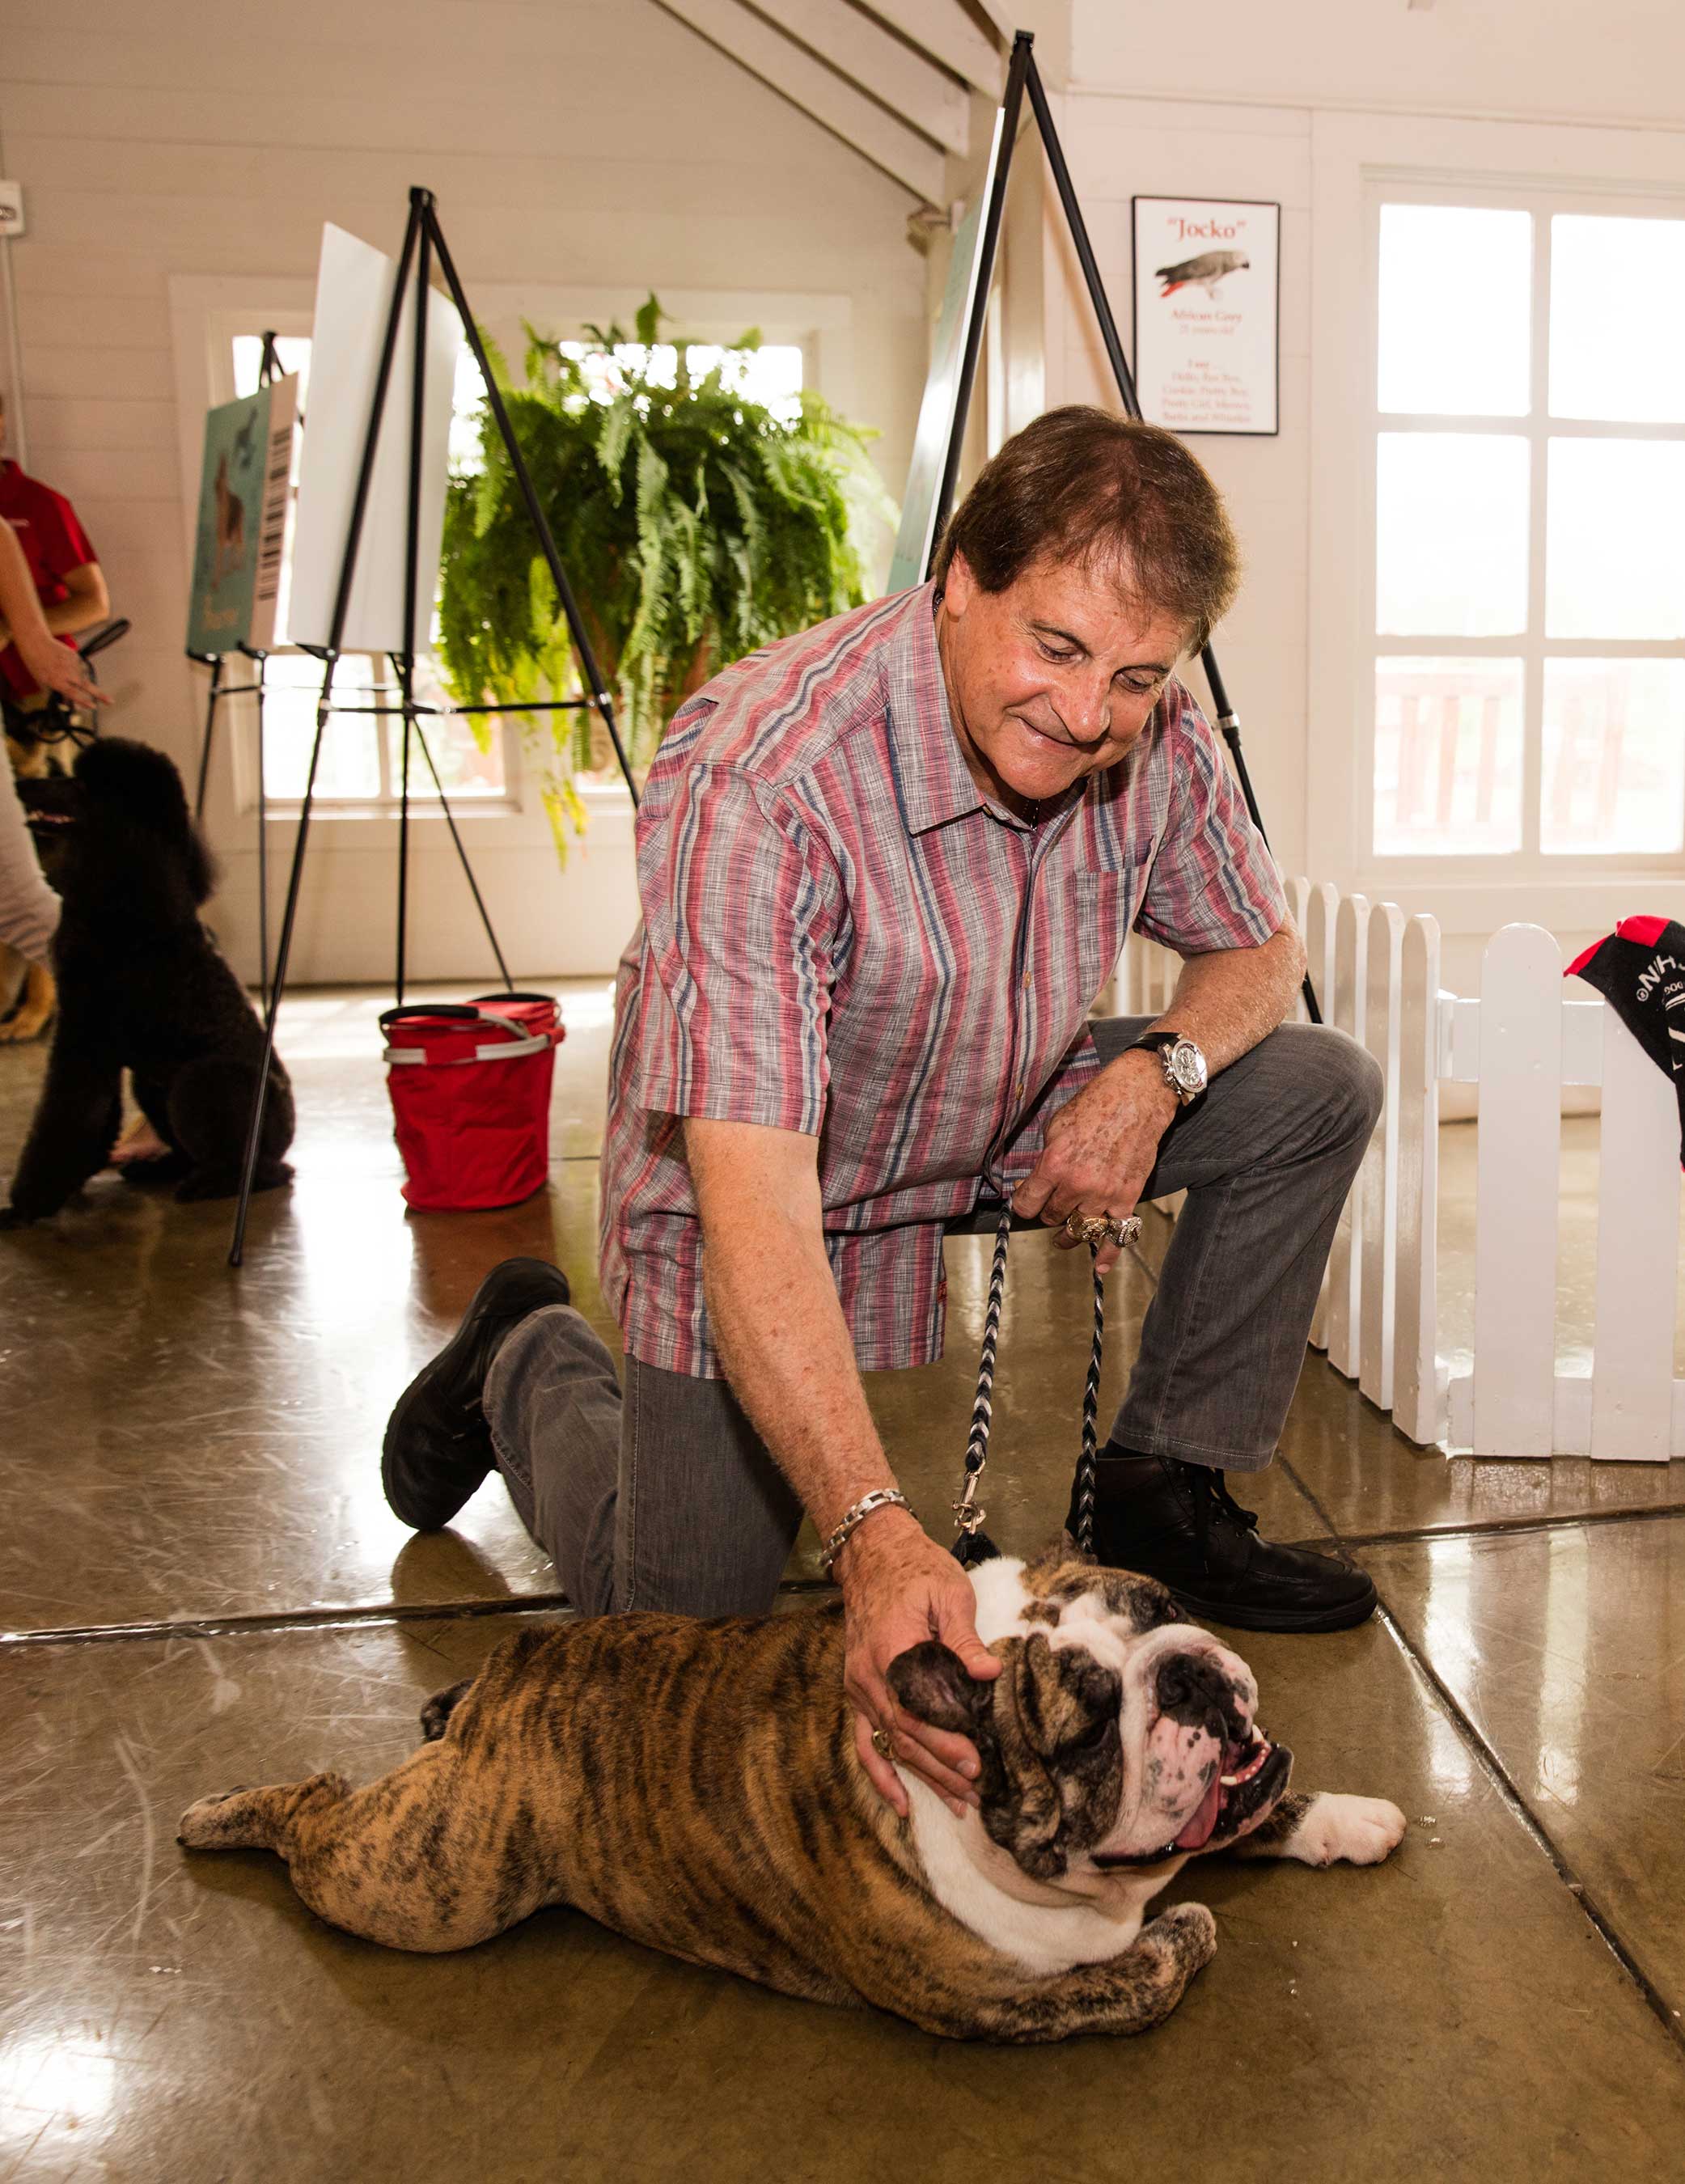 Tony La Russa, co-founder of Tony La Russa’s Animal Rescue Foundation, pets Xerk, a 2-year-old Bulldog, during the grand opening celebration July 14, 2016, for “Better with Pets,” a new exhibit at the Purina Farms Visitor Center in Gray Summit, Missouri.